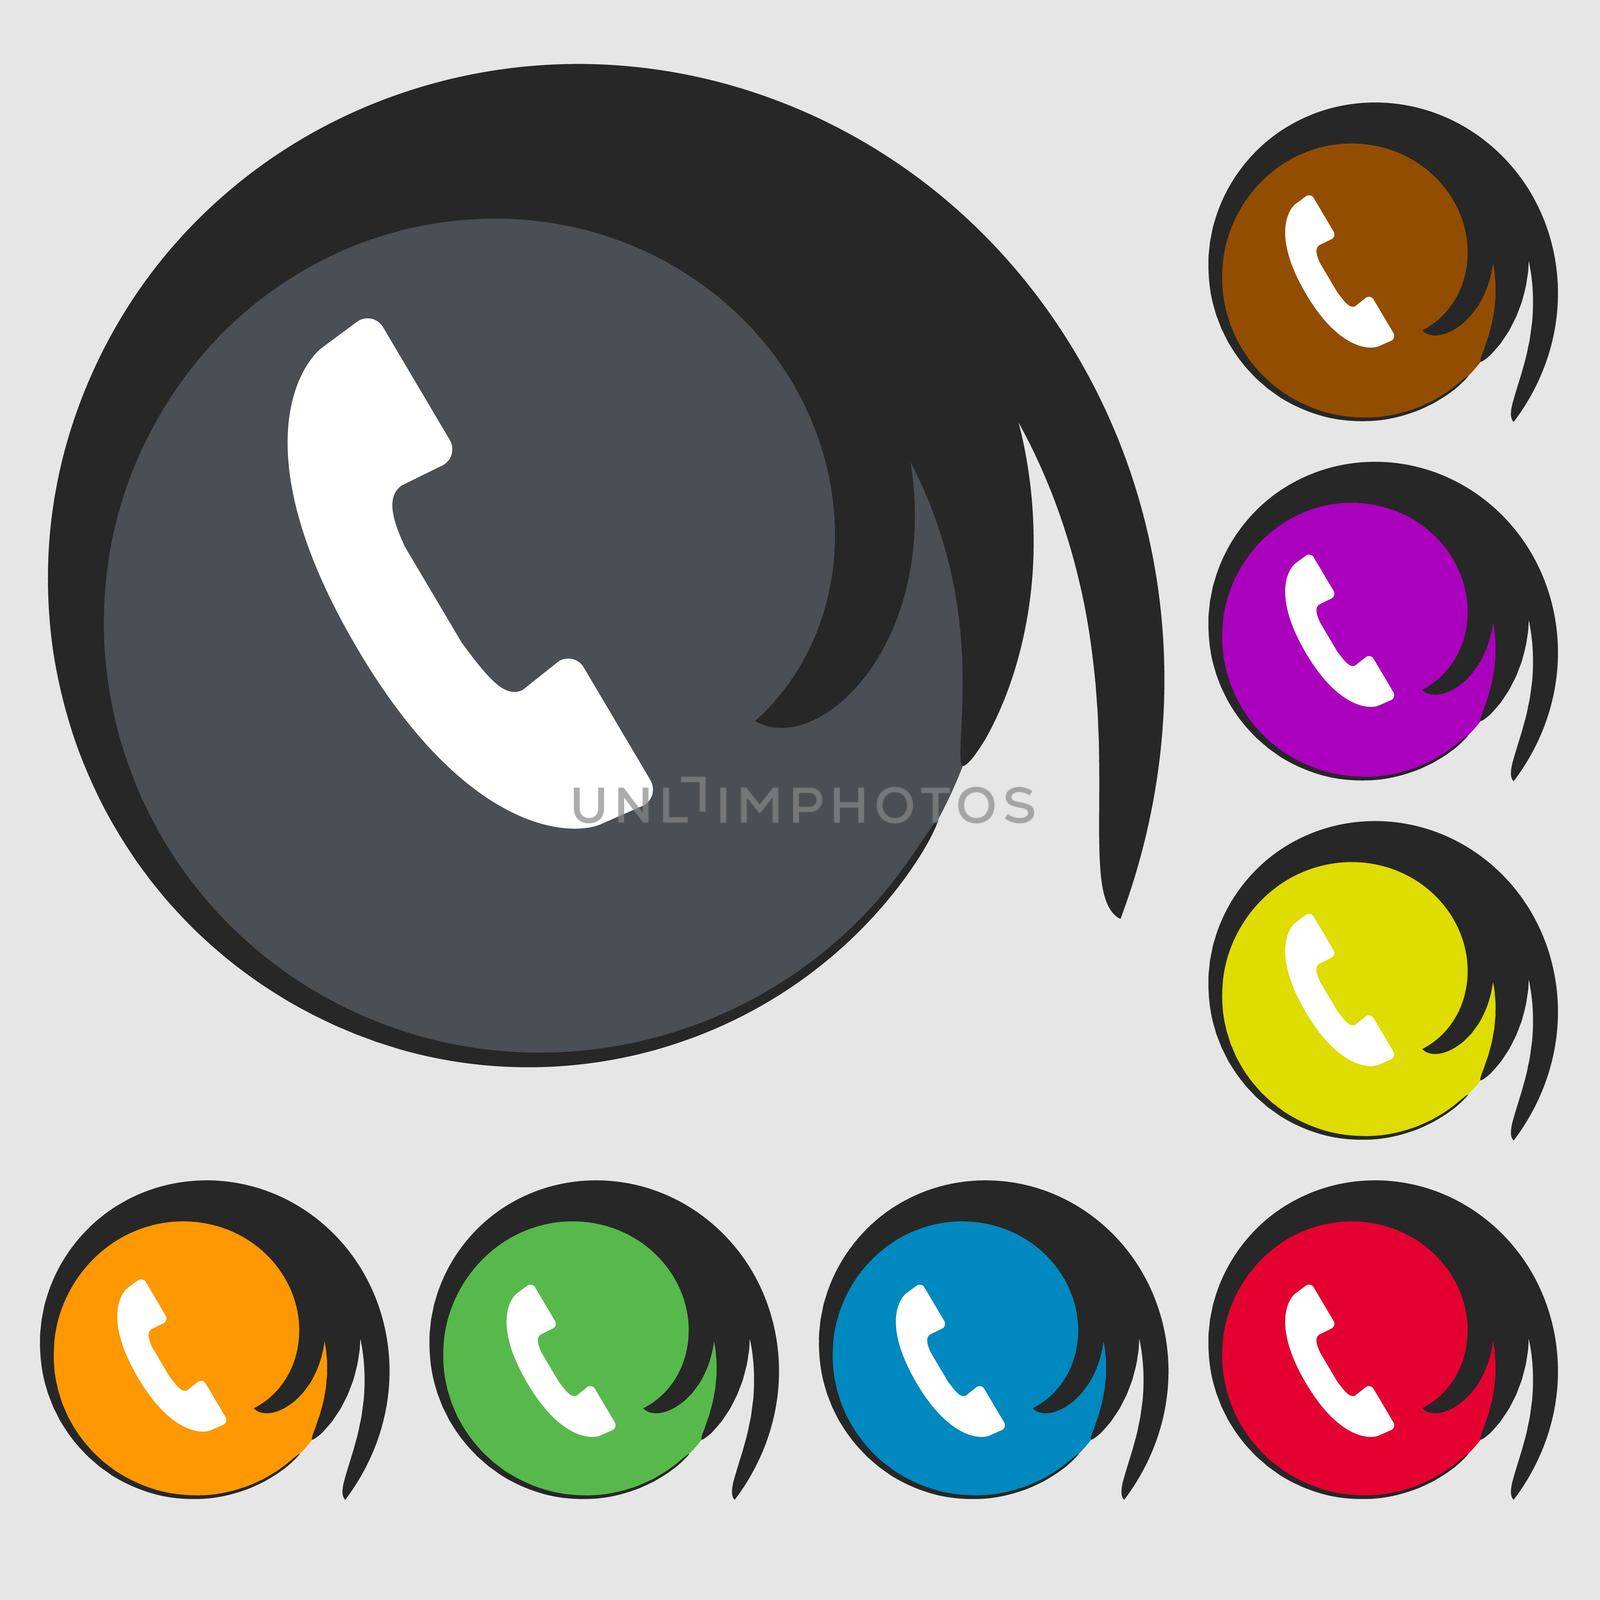 Phone sign icon. Support symbol. Call center. Symbols on eight colored buttons. illustration